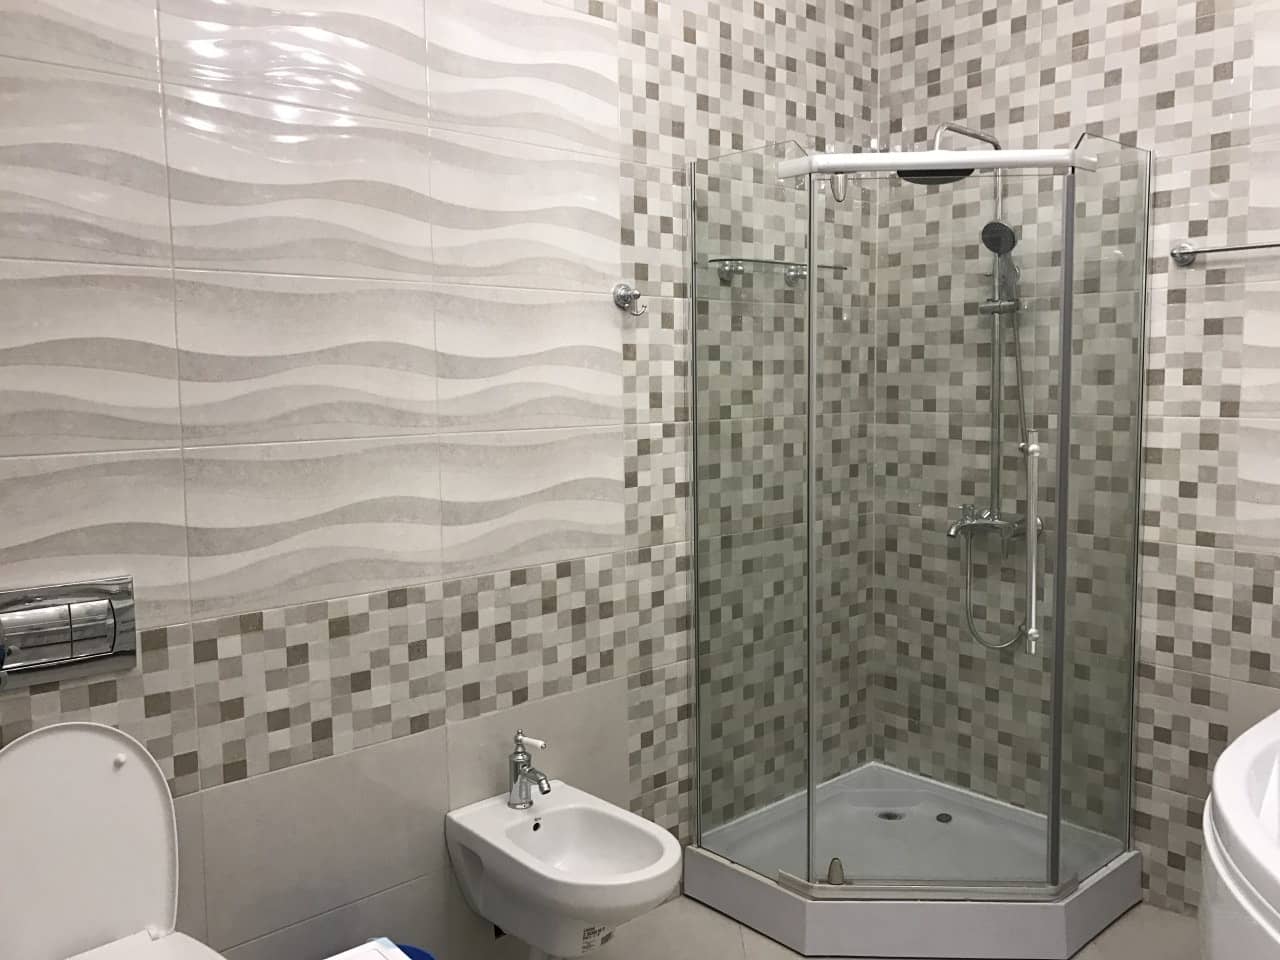 Top 15 Common Mistakes during Bathroom Renovations. Textured tile and mosaic